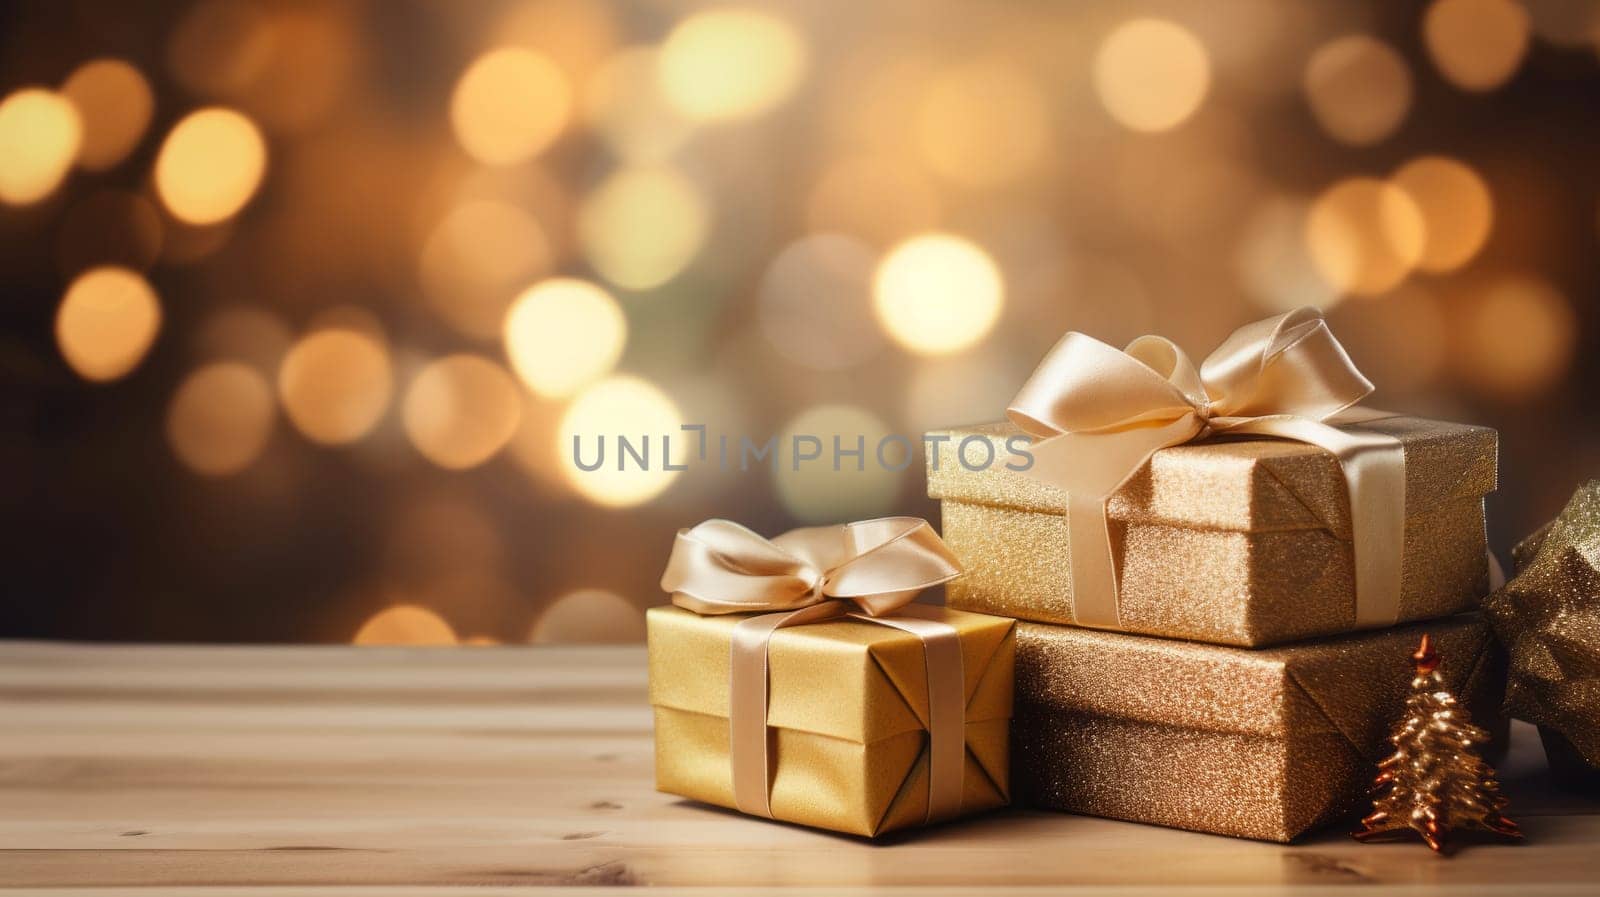 A stack of Christmas presents with gold ribbons on a wooden table with a blurred background of lights. The concept is Christmas and gift giving. High quality photo